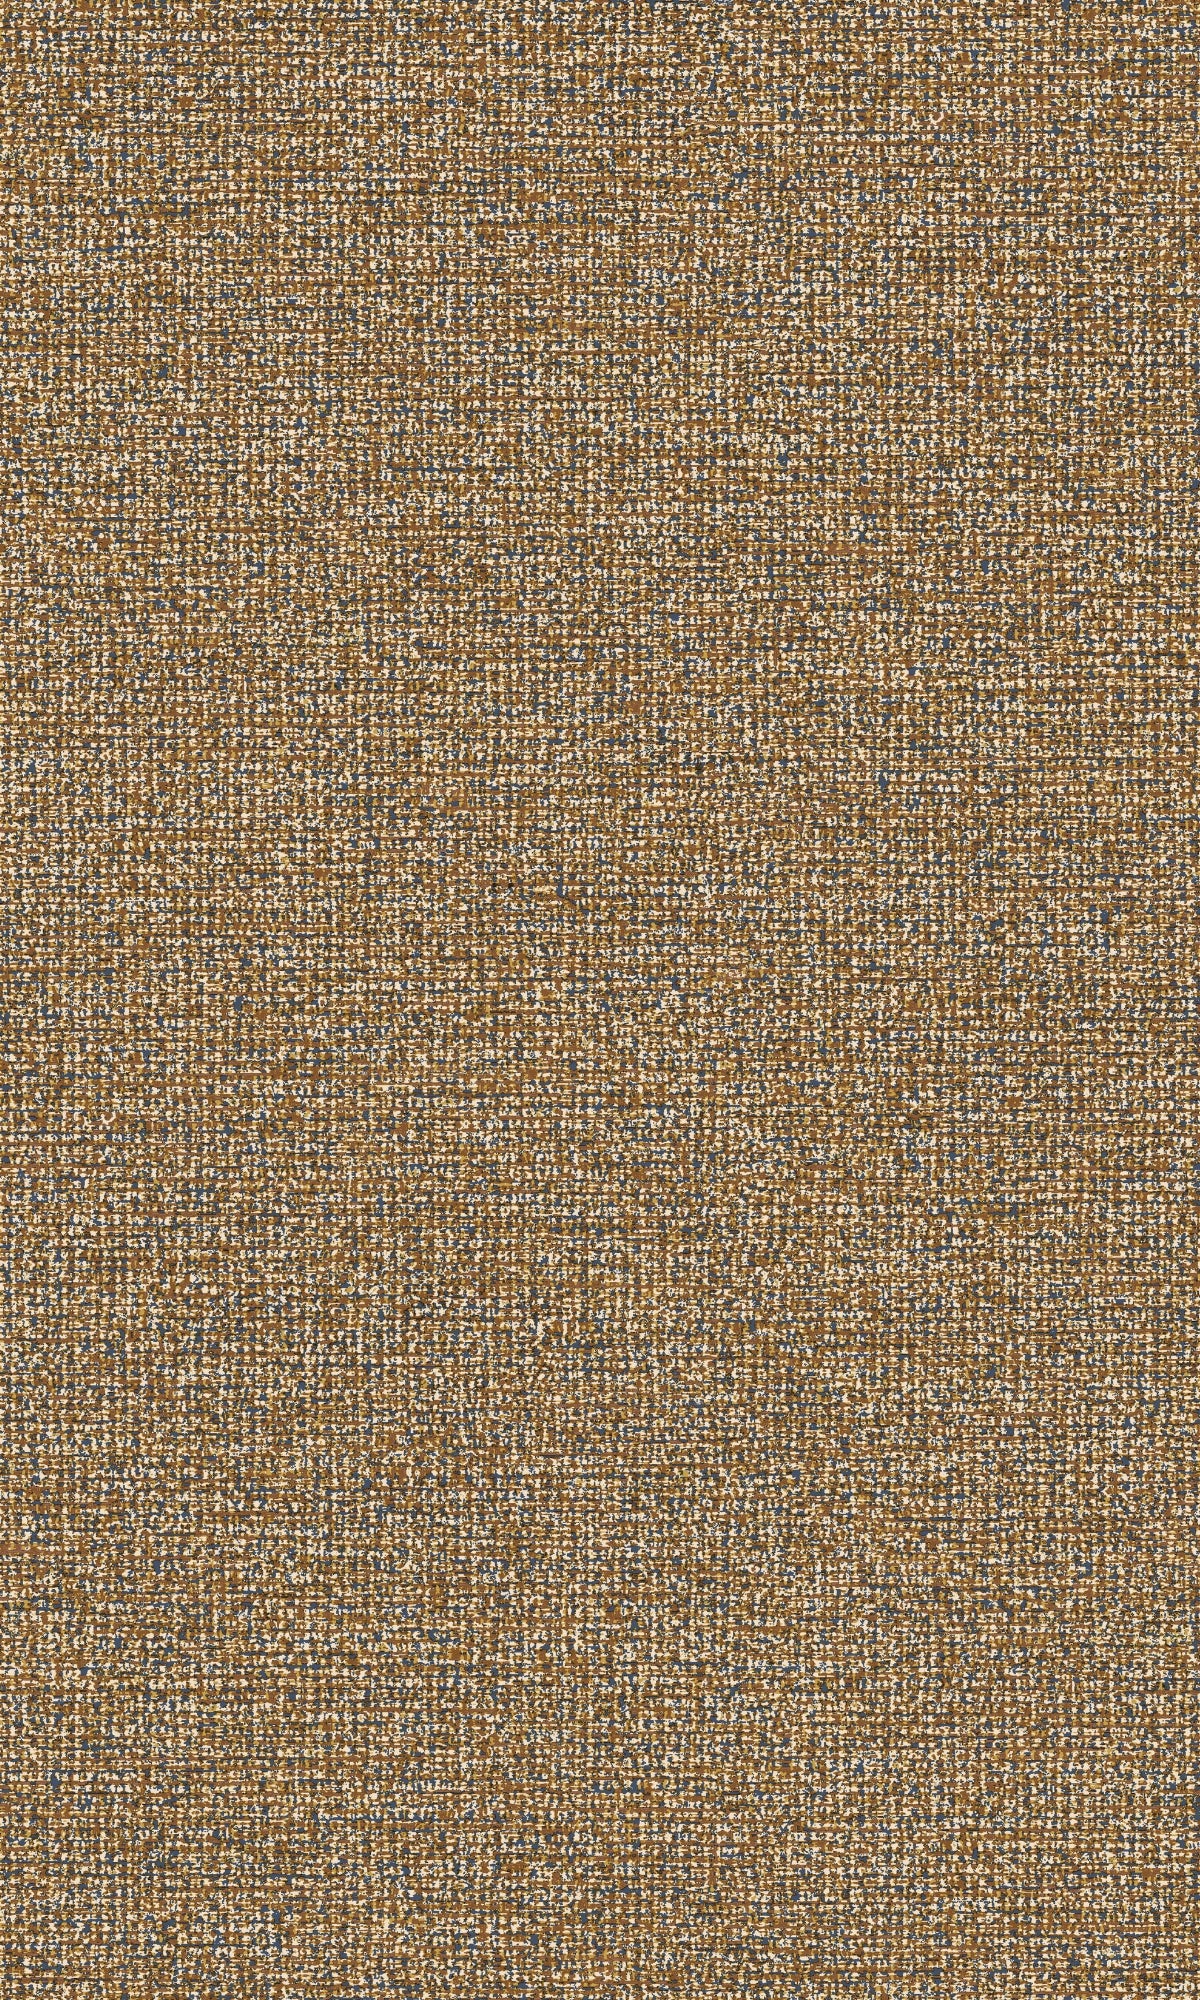 Camel & Blue Fabric Like Textured Non-Woven Wallpaper R9079